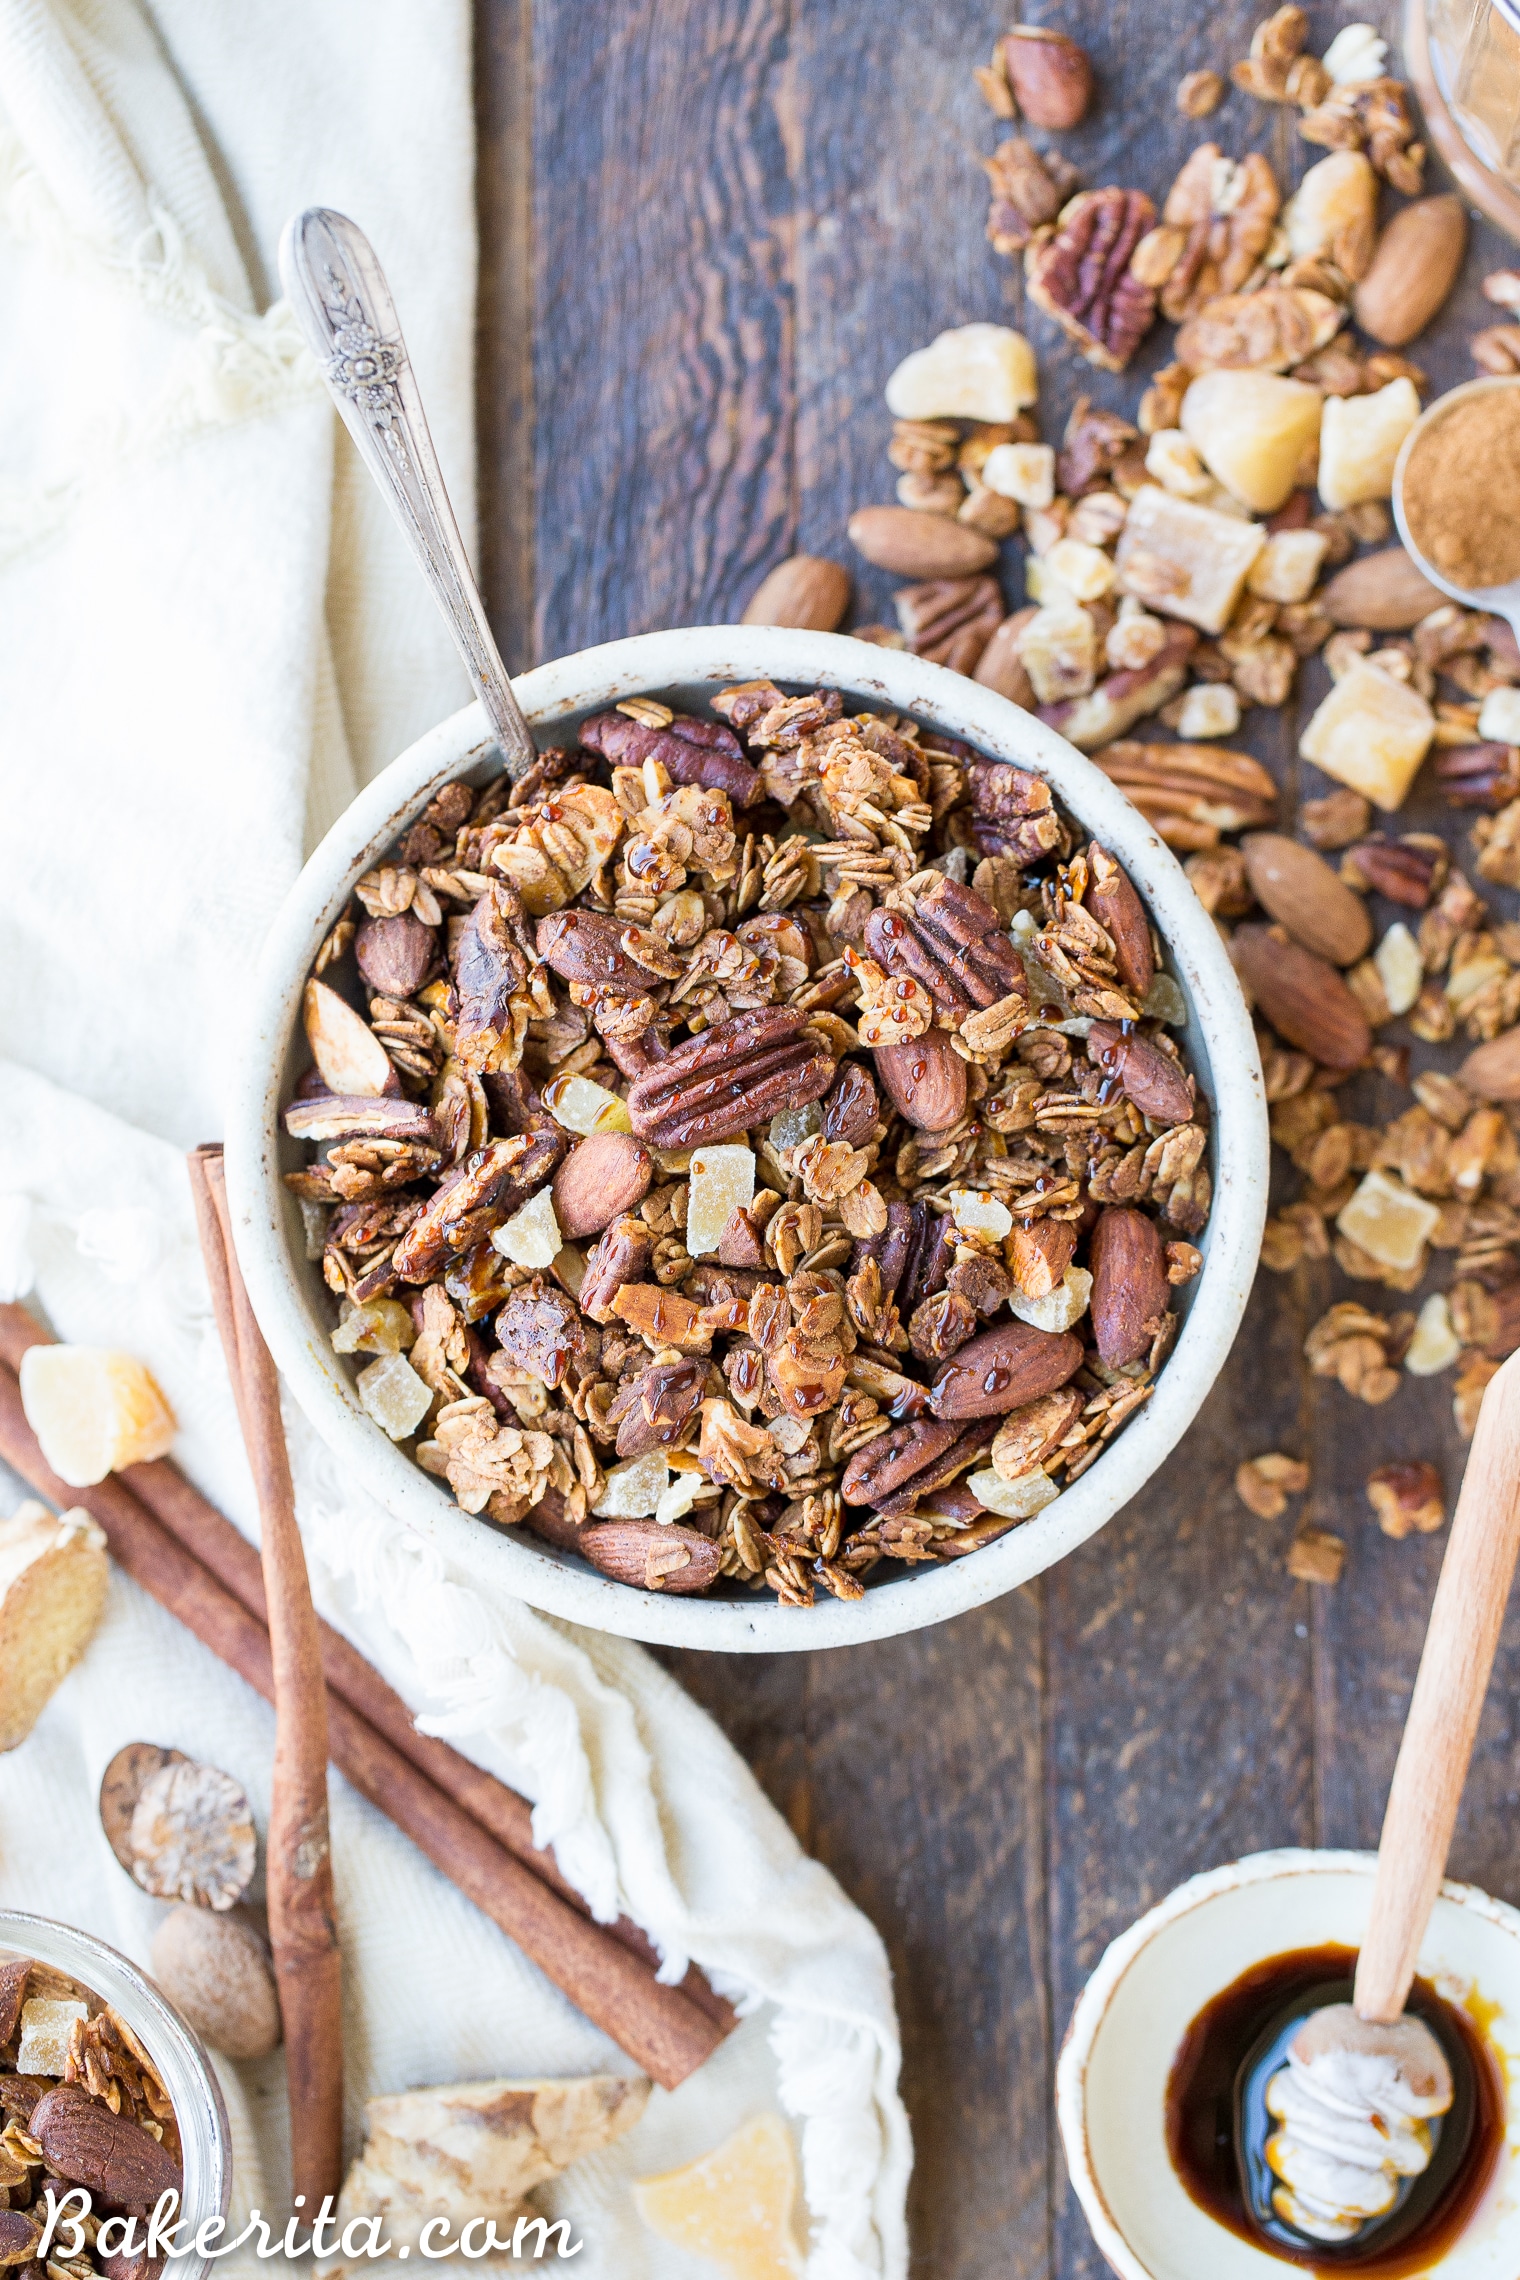 This Gingerbread Granola is crunchy & full of clusters, with loads of warm gingerbread spices, molasses, and bits of chewy crystallized ginger. This gluten-free and vegan breakfast is perfect for breakfast, or to package up in a cute jar and gift as a gift!